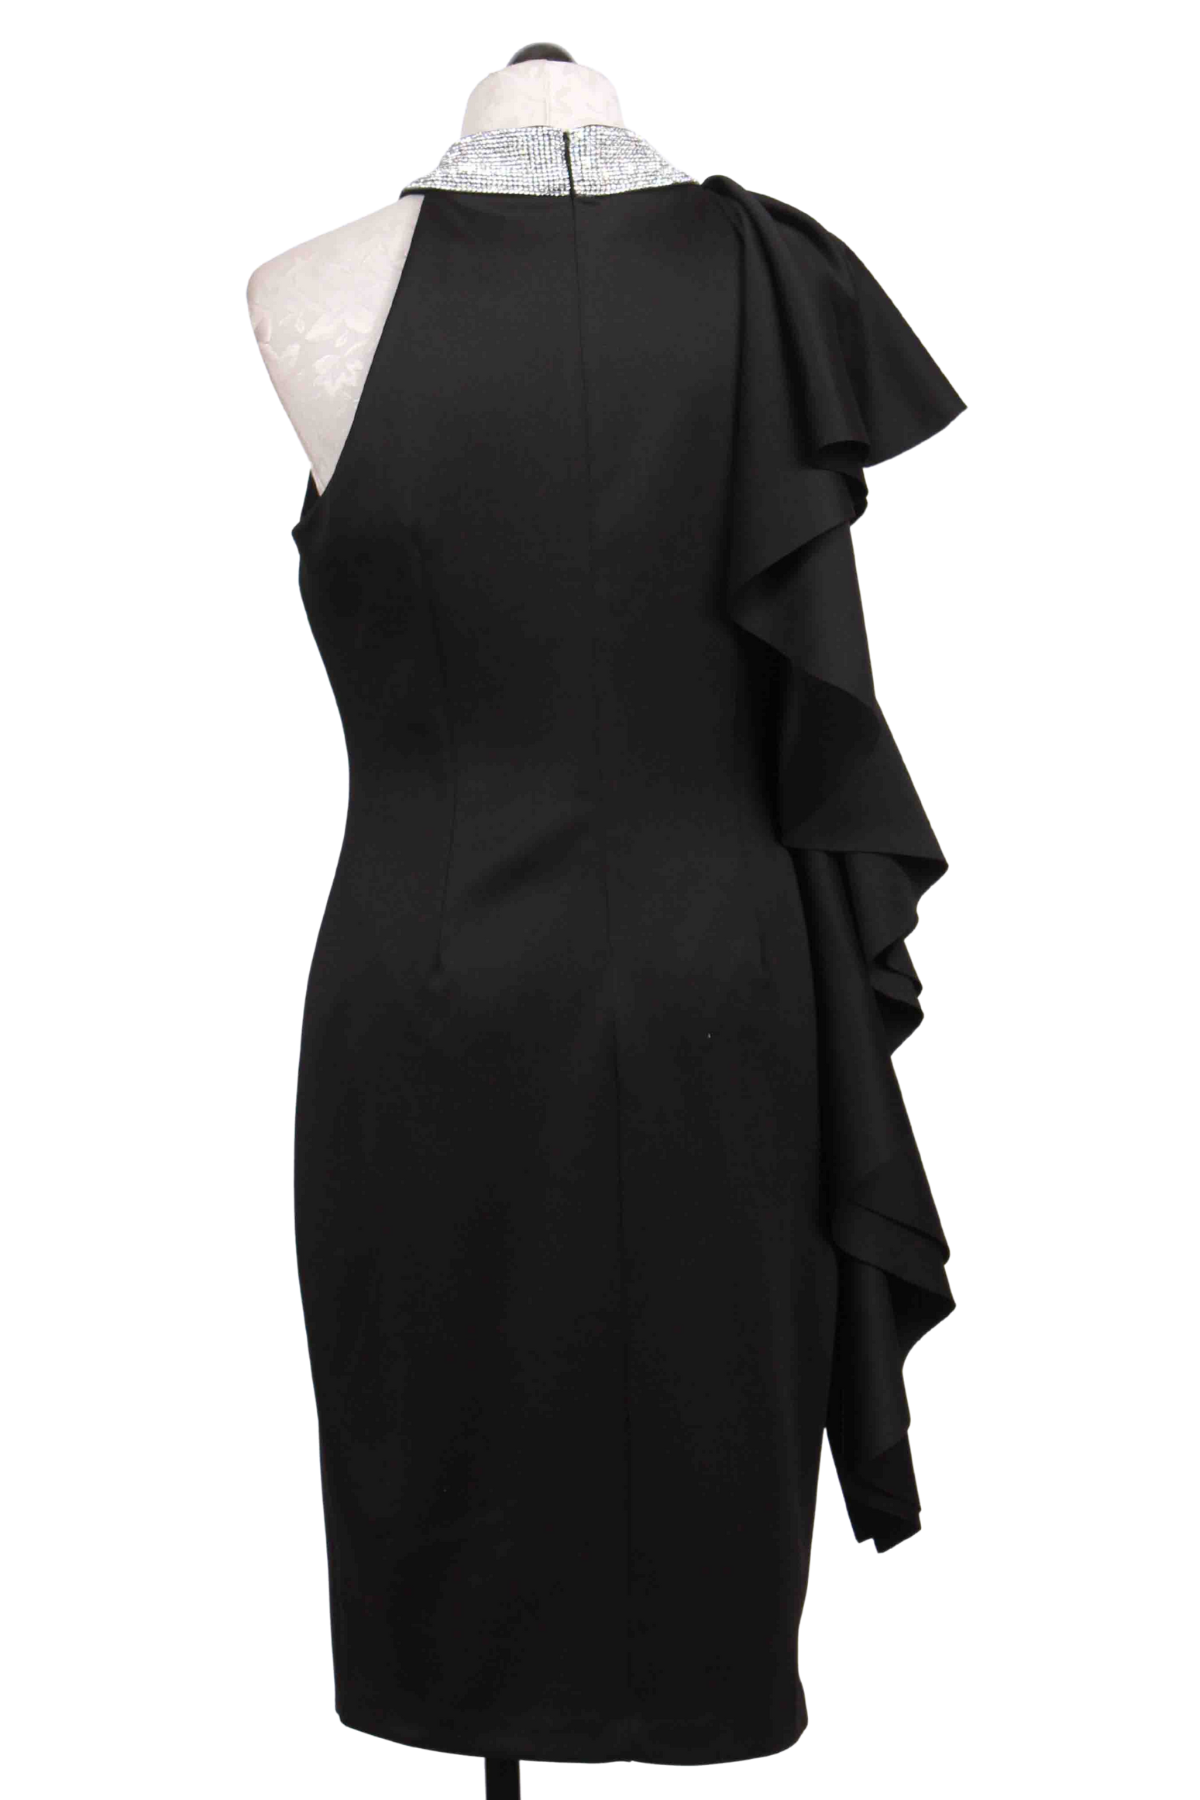 back view of black Sleeveless Ruffle Sided Dress by Frank Lyman with Crystal studded Neck